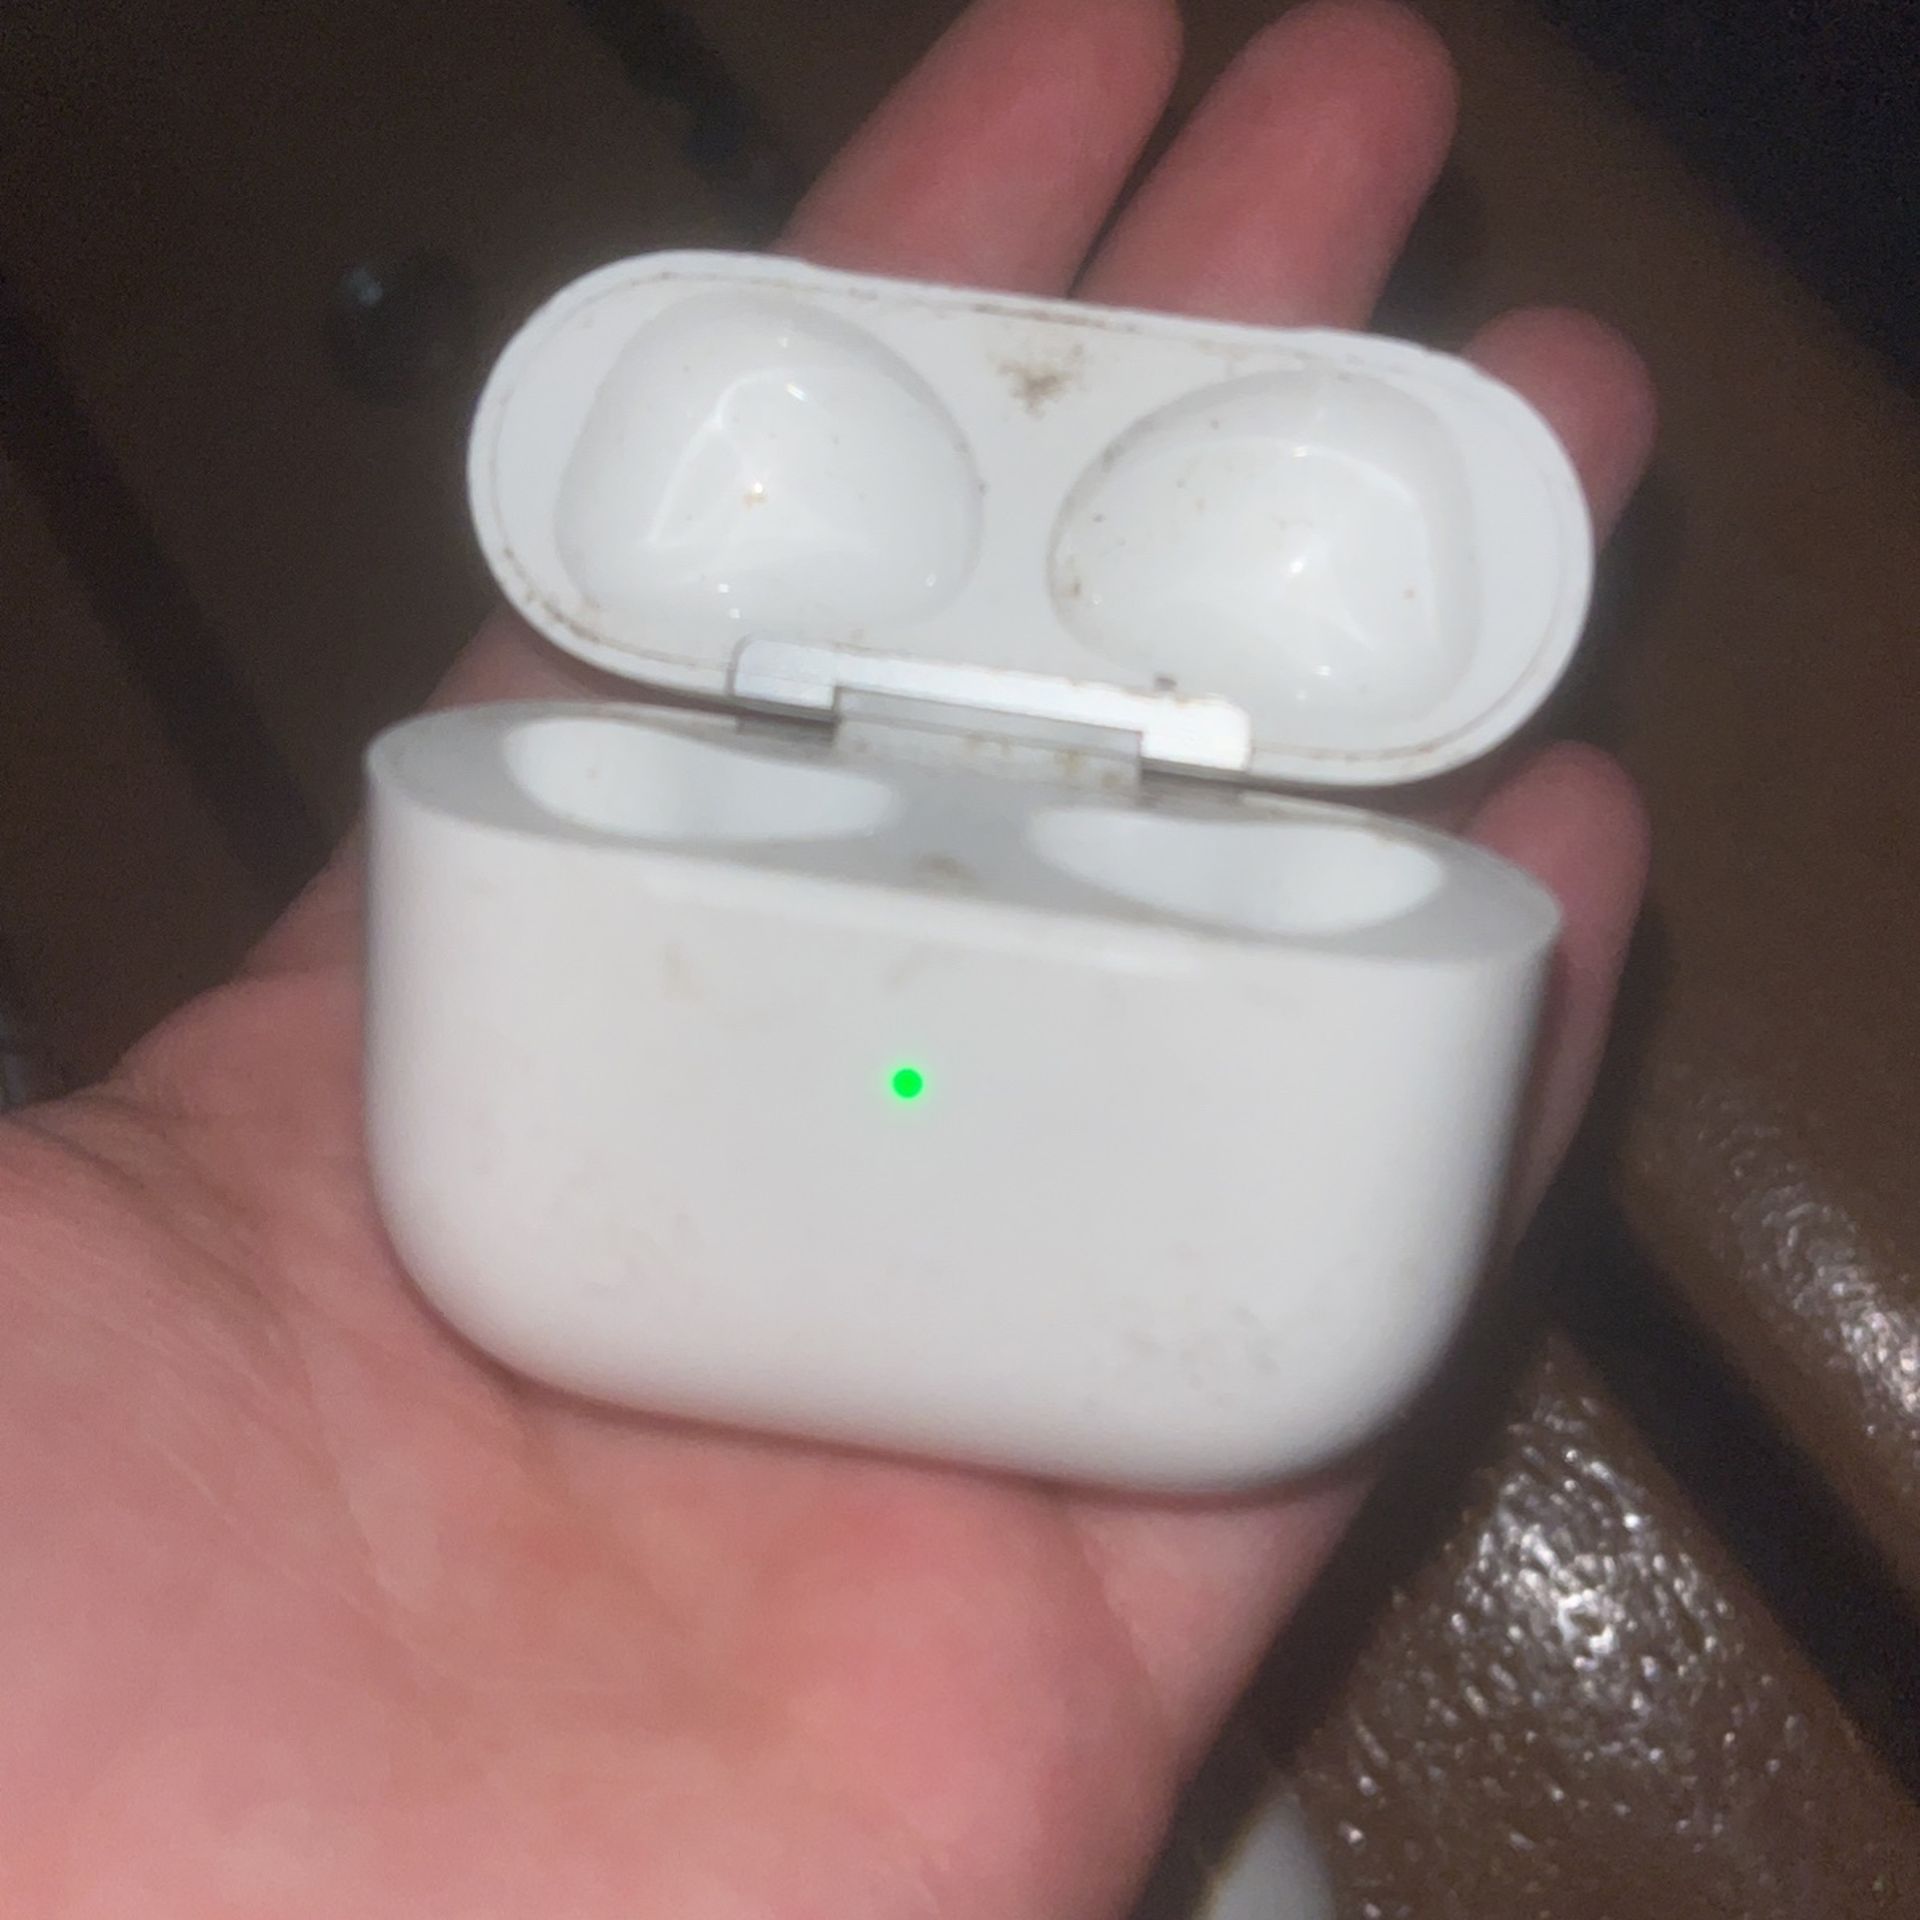 white airpod pro charging CASE and 3rd gen airpod charging CASE